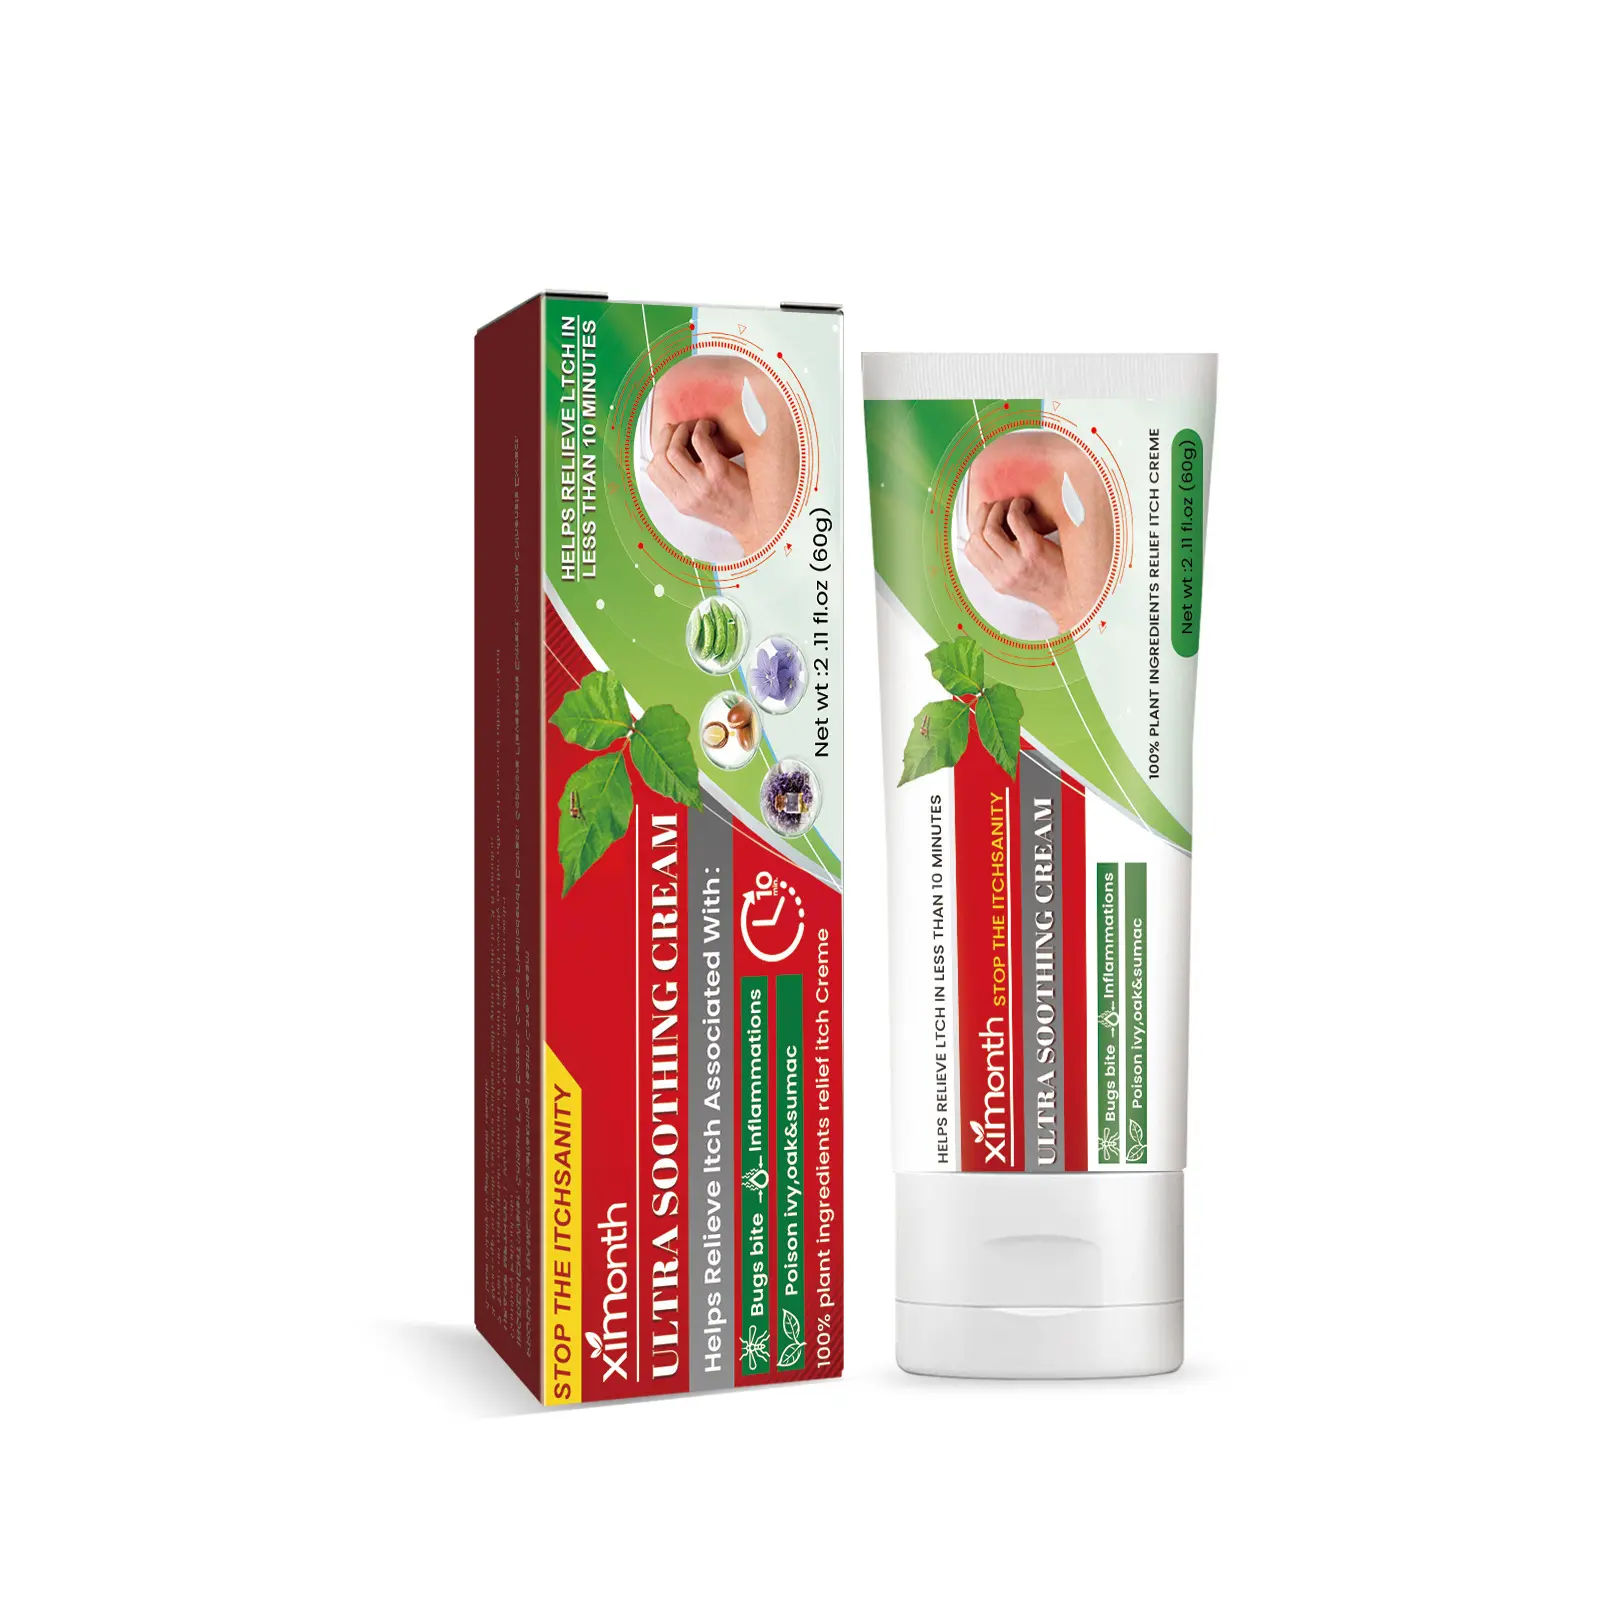 Private label Ximonth herbal organic ultra soothing cream relieving itch in less than 10minutes skin anti itch cream